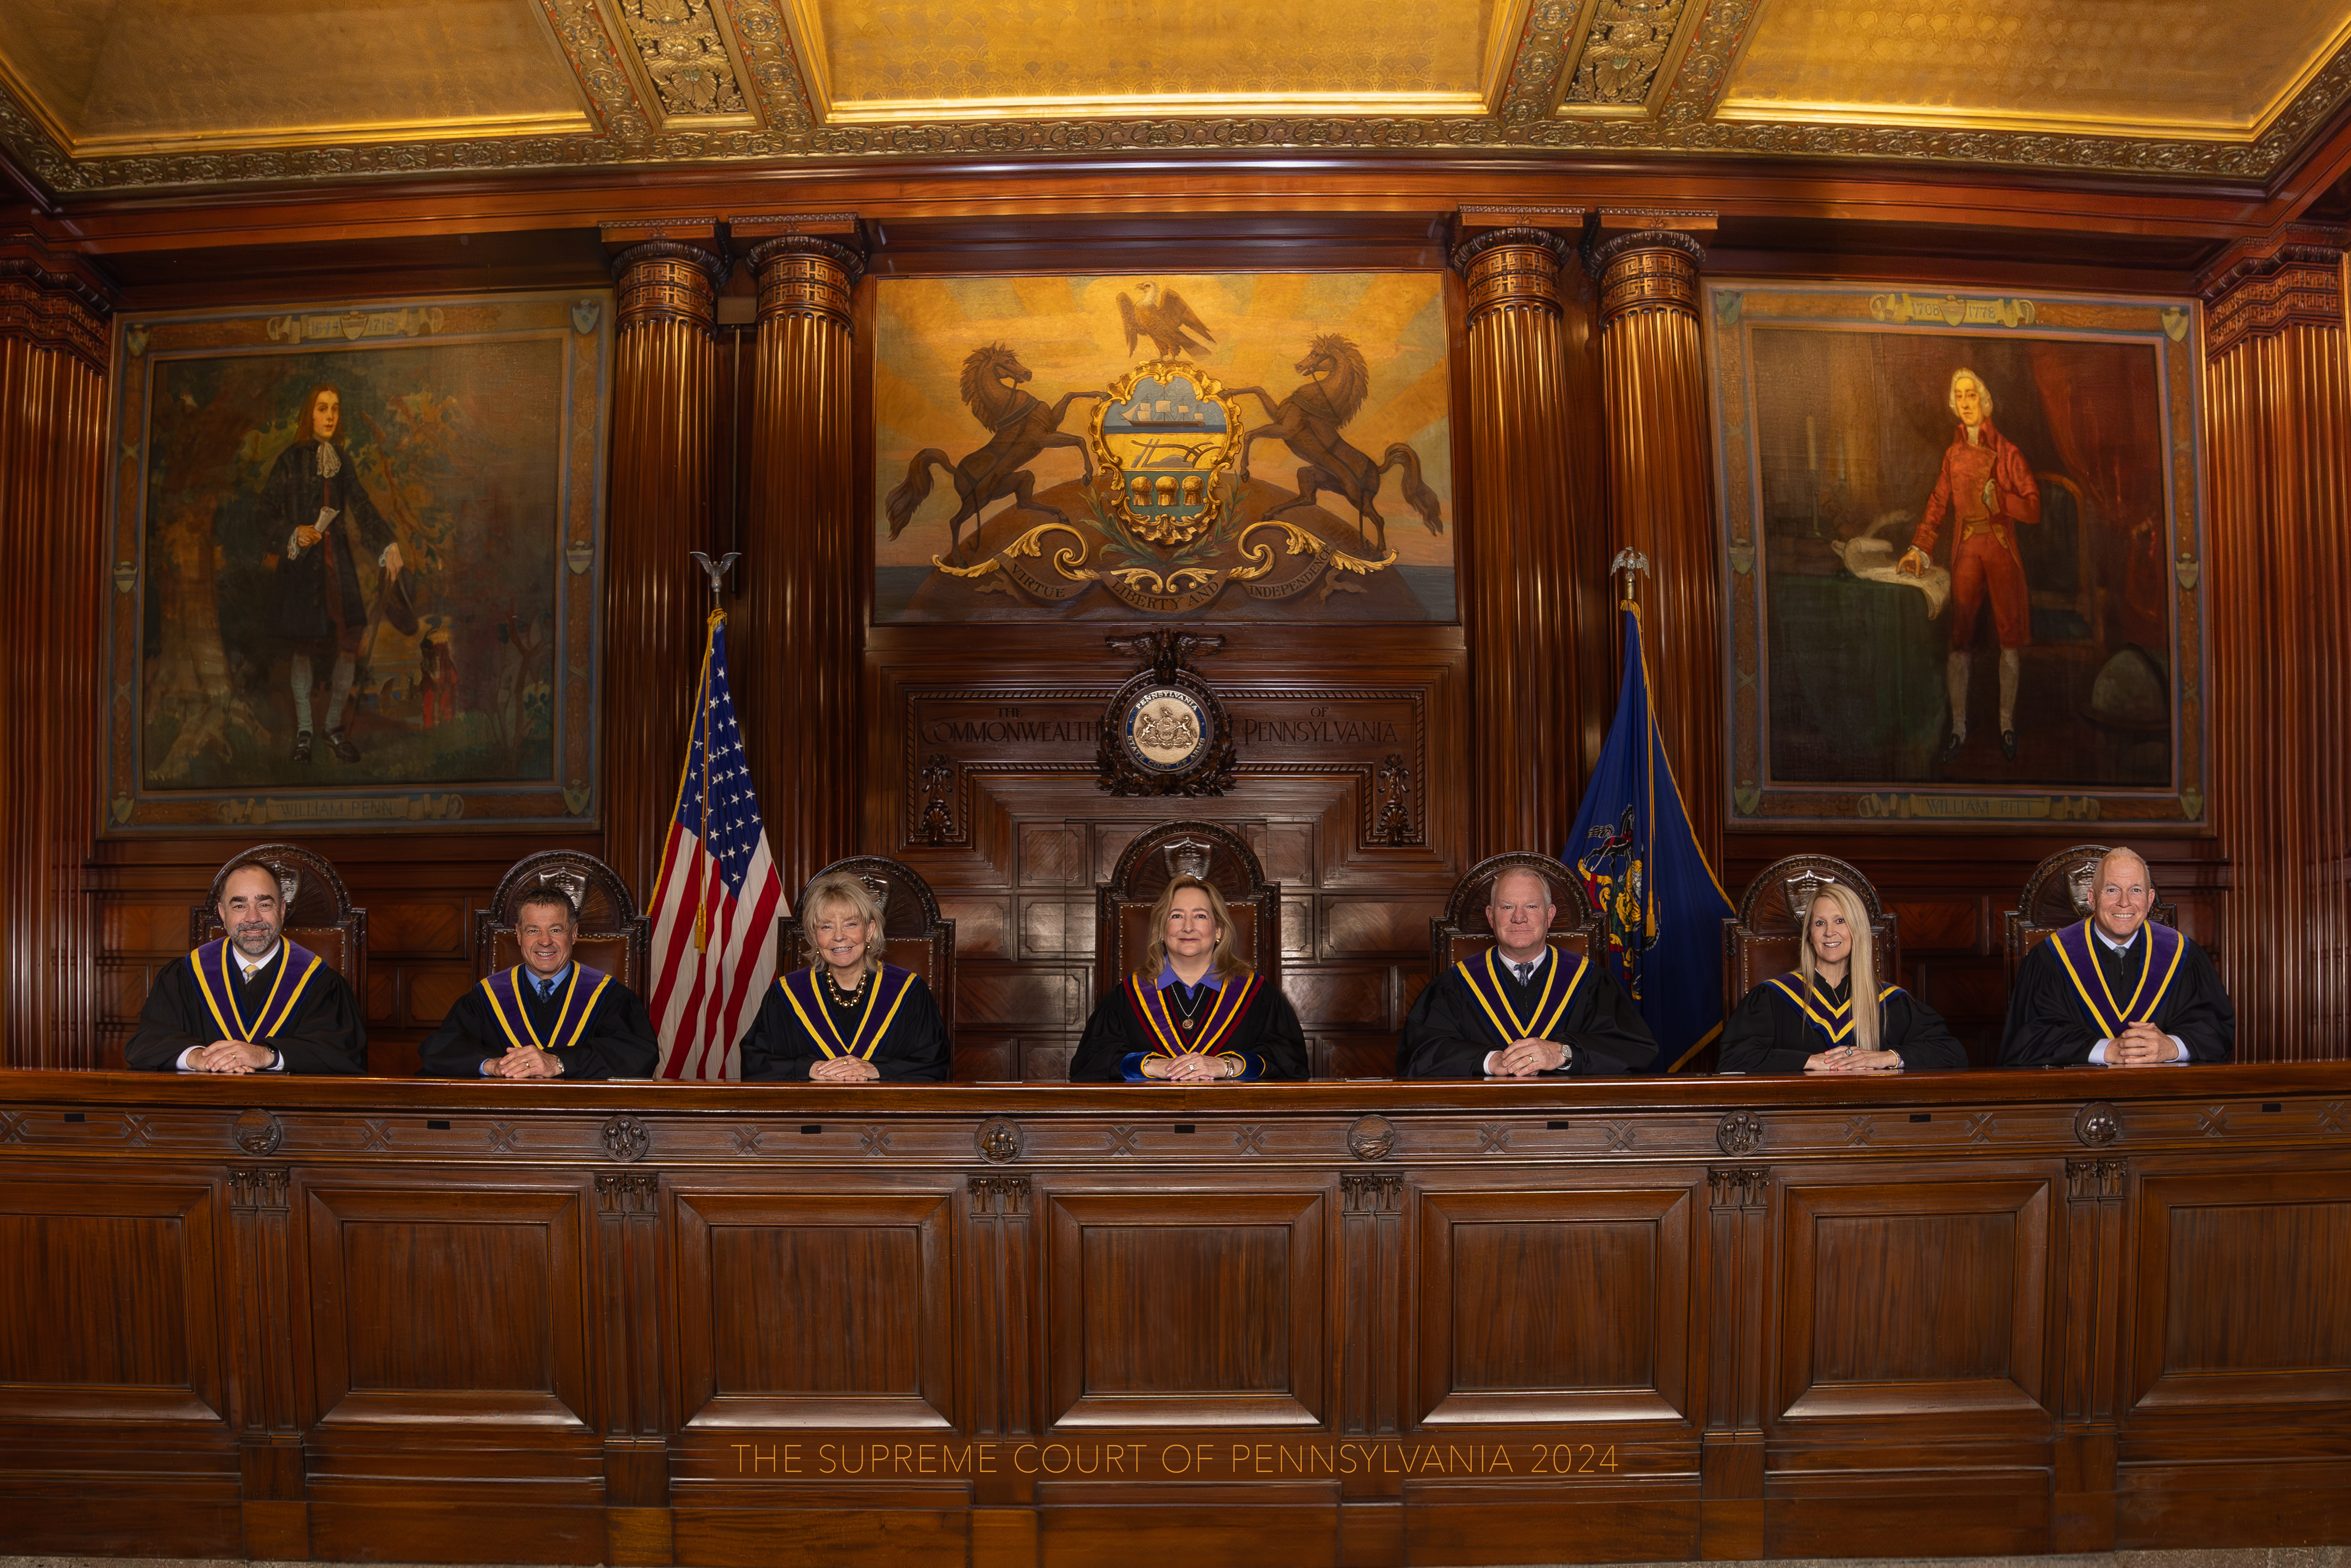 Justices of the Supreme Court of Pennsylvania